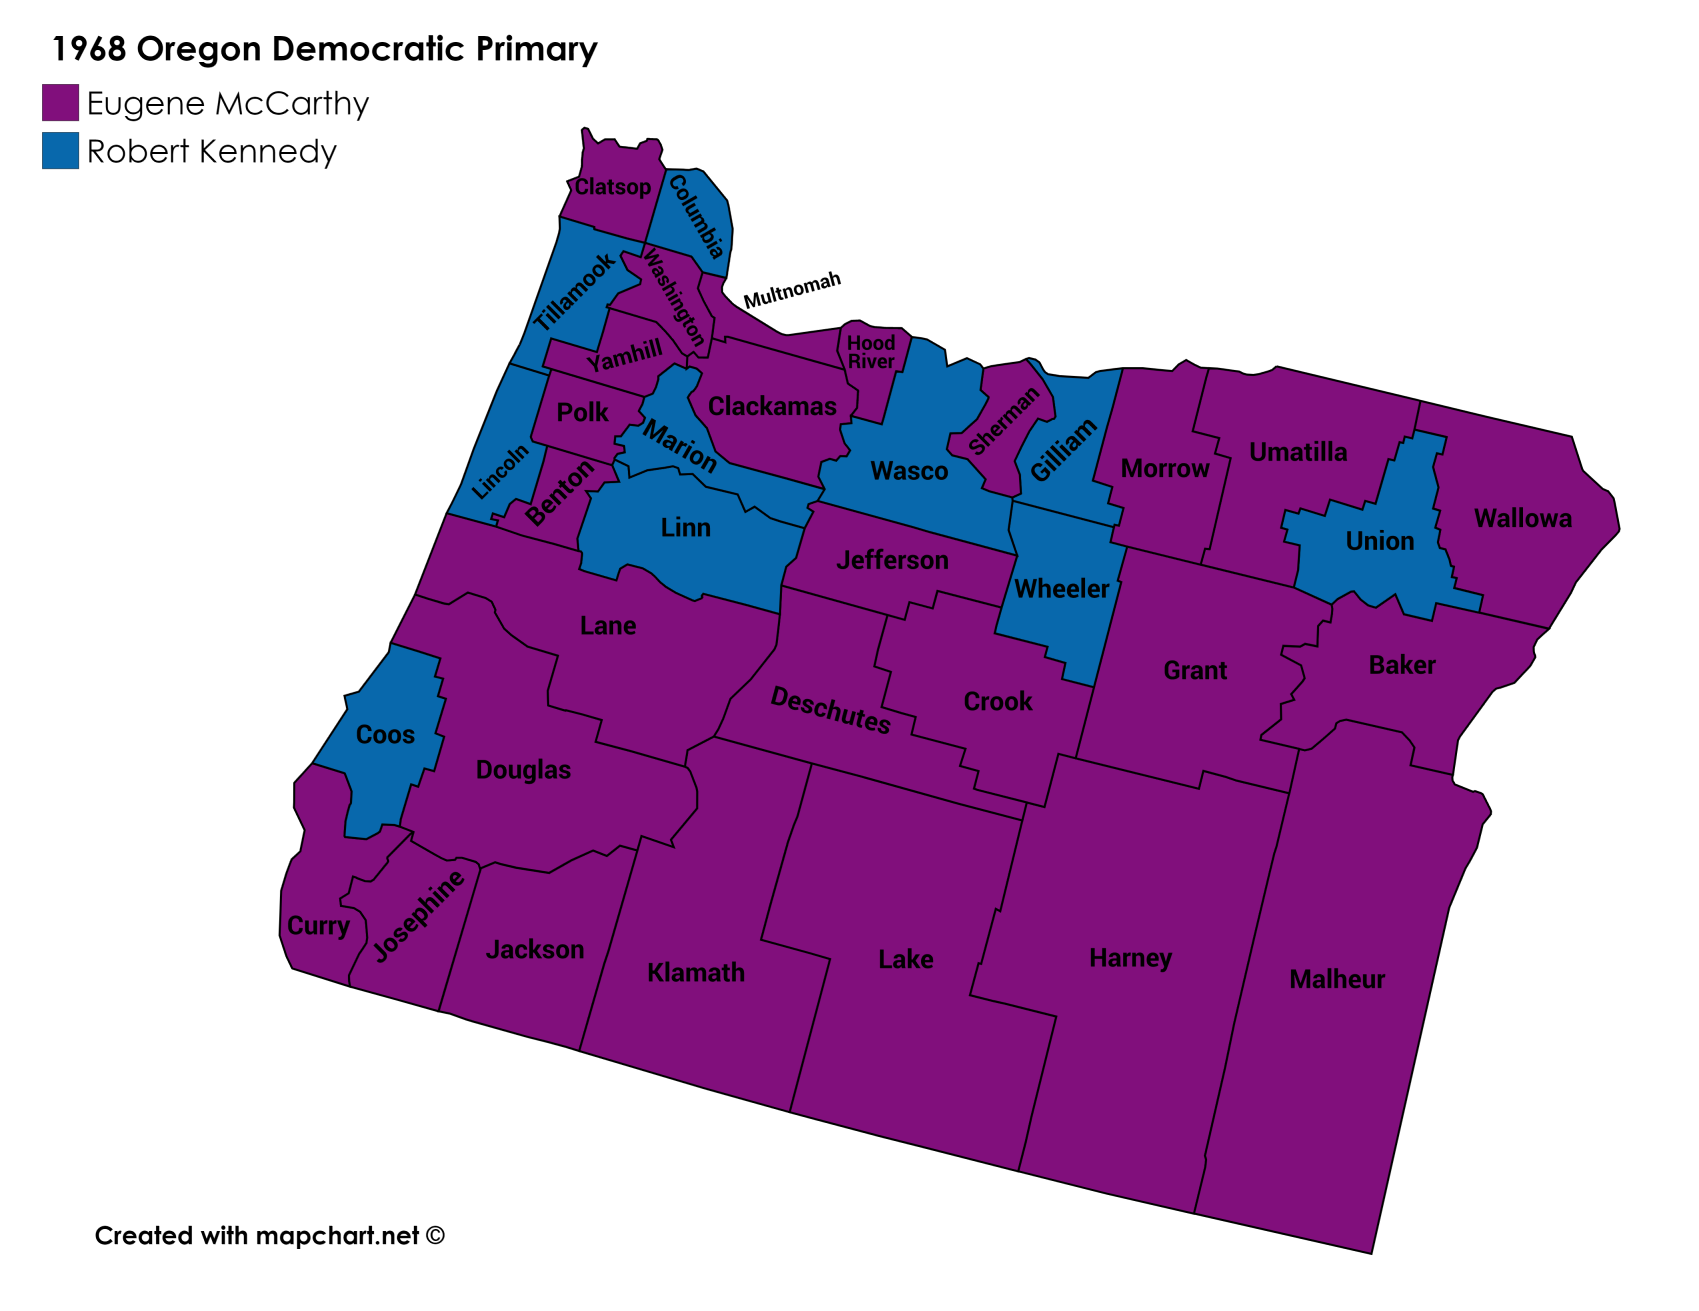 1968 Oregon Democratic Primary cropped.png